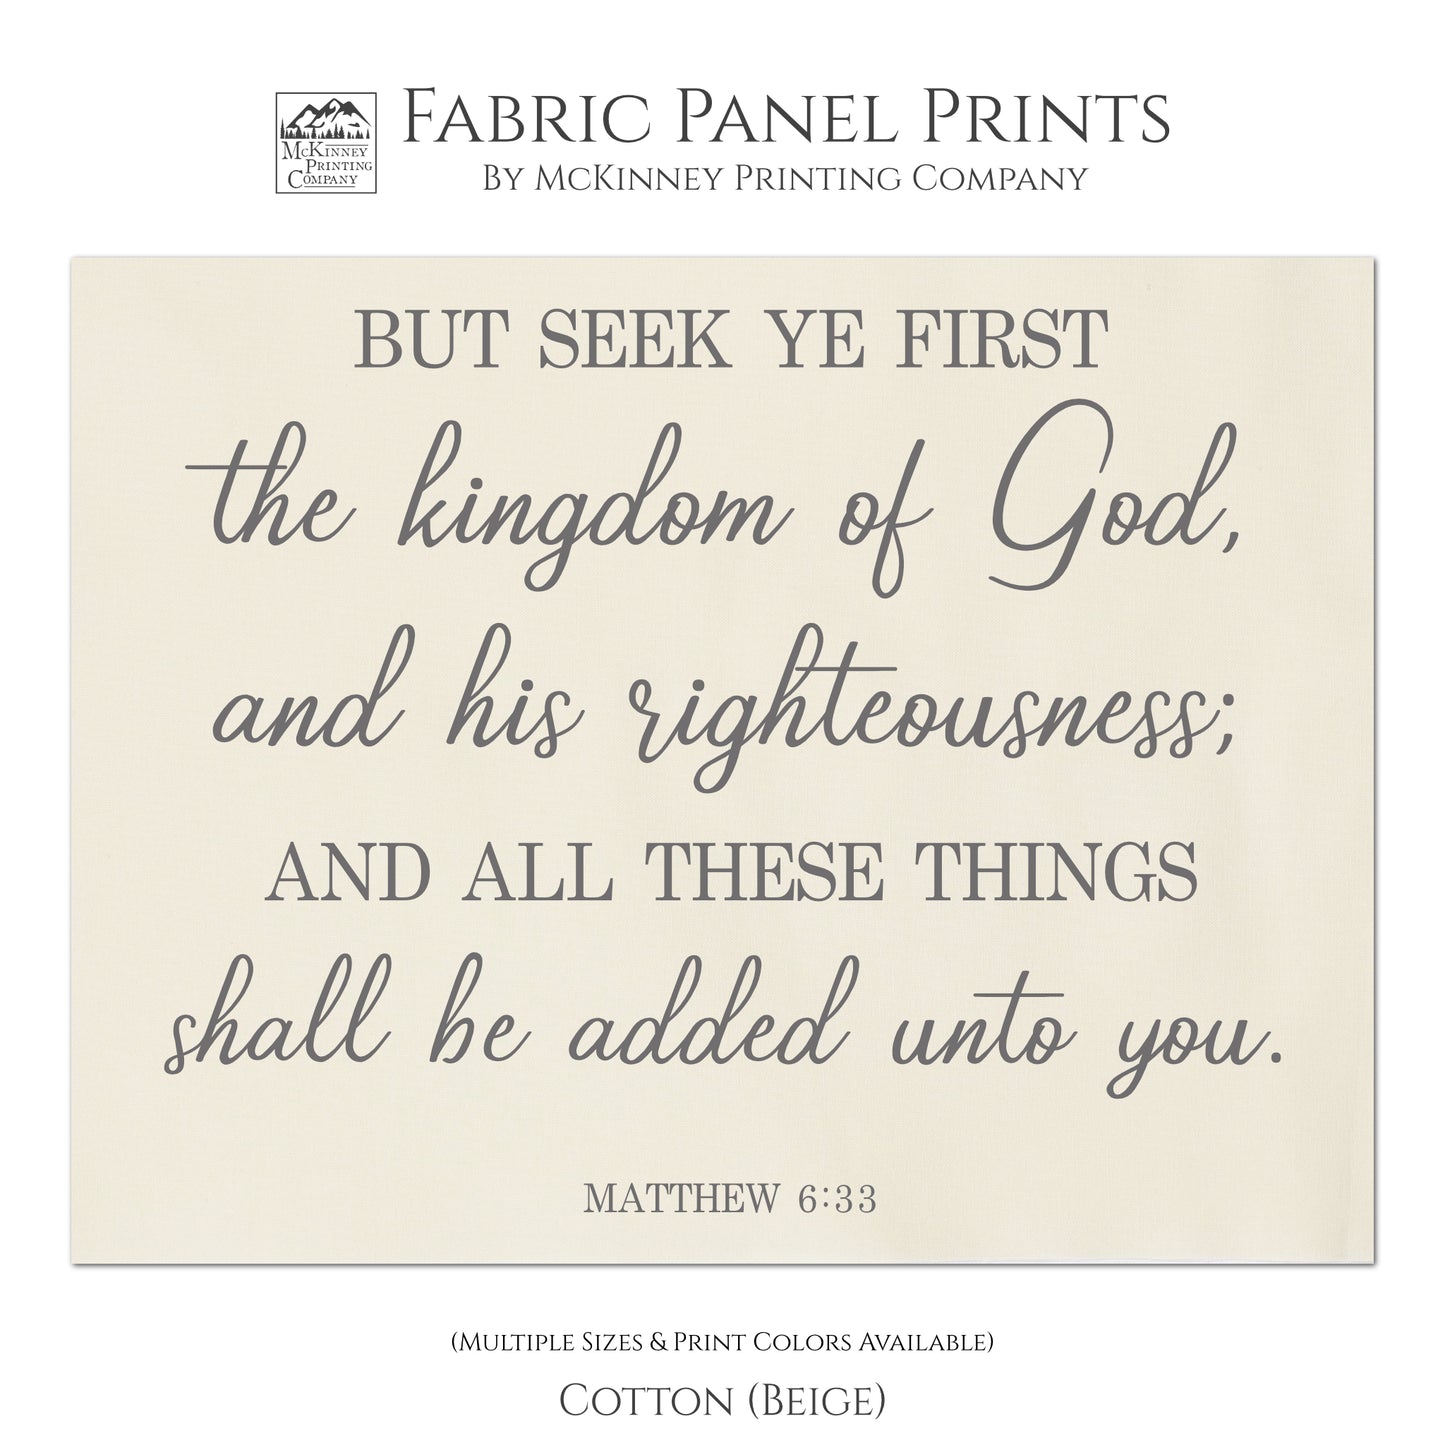 But seek ye first the kingdom of God, and his righteousness; and all these things shall be added unto you. Matthew 6 33, Scripture Fabric, Quilt Block Print, Fabric Panel - Cotton